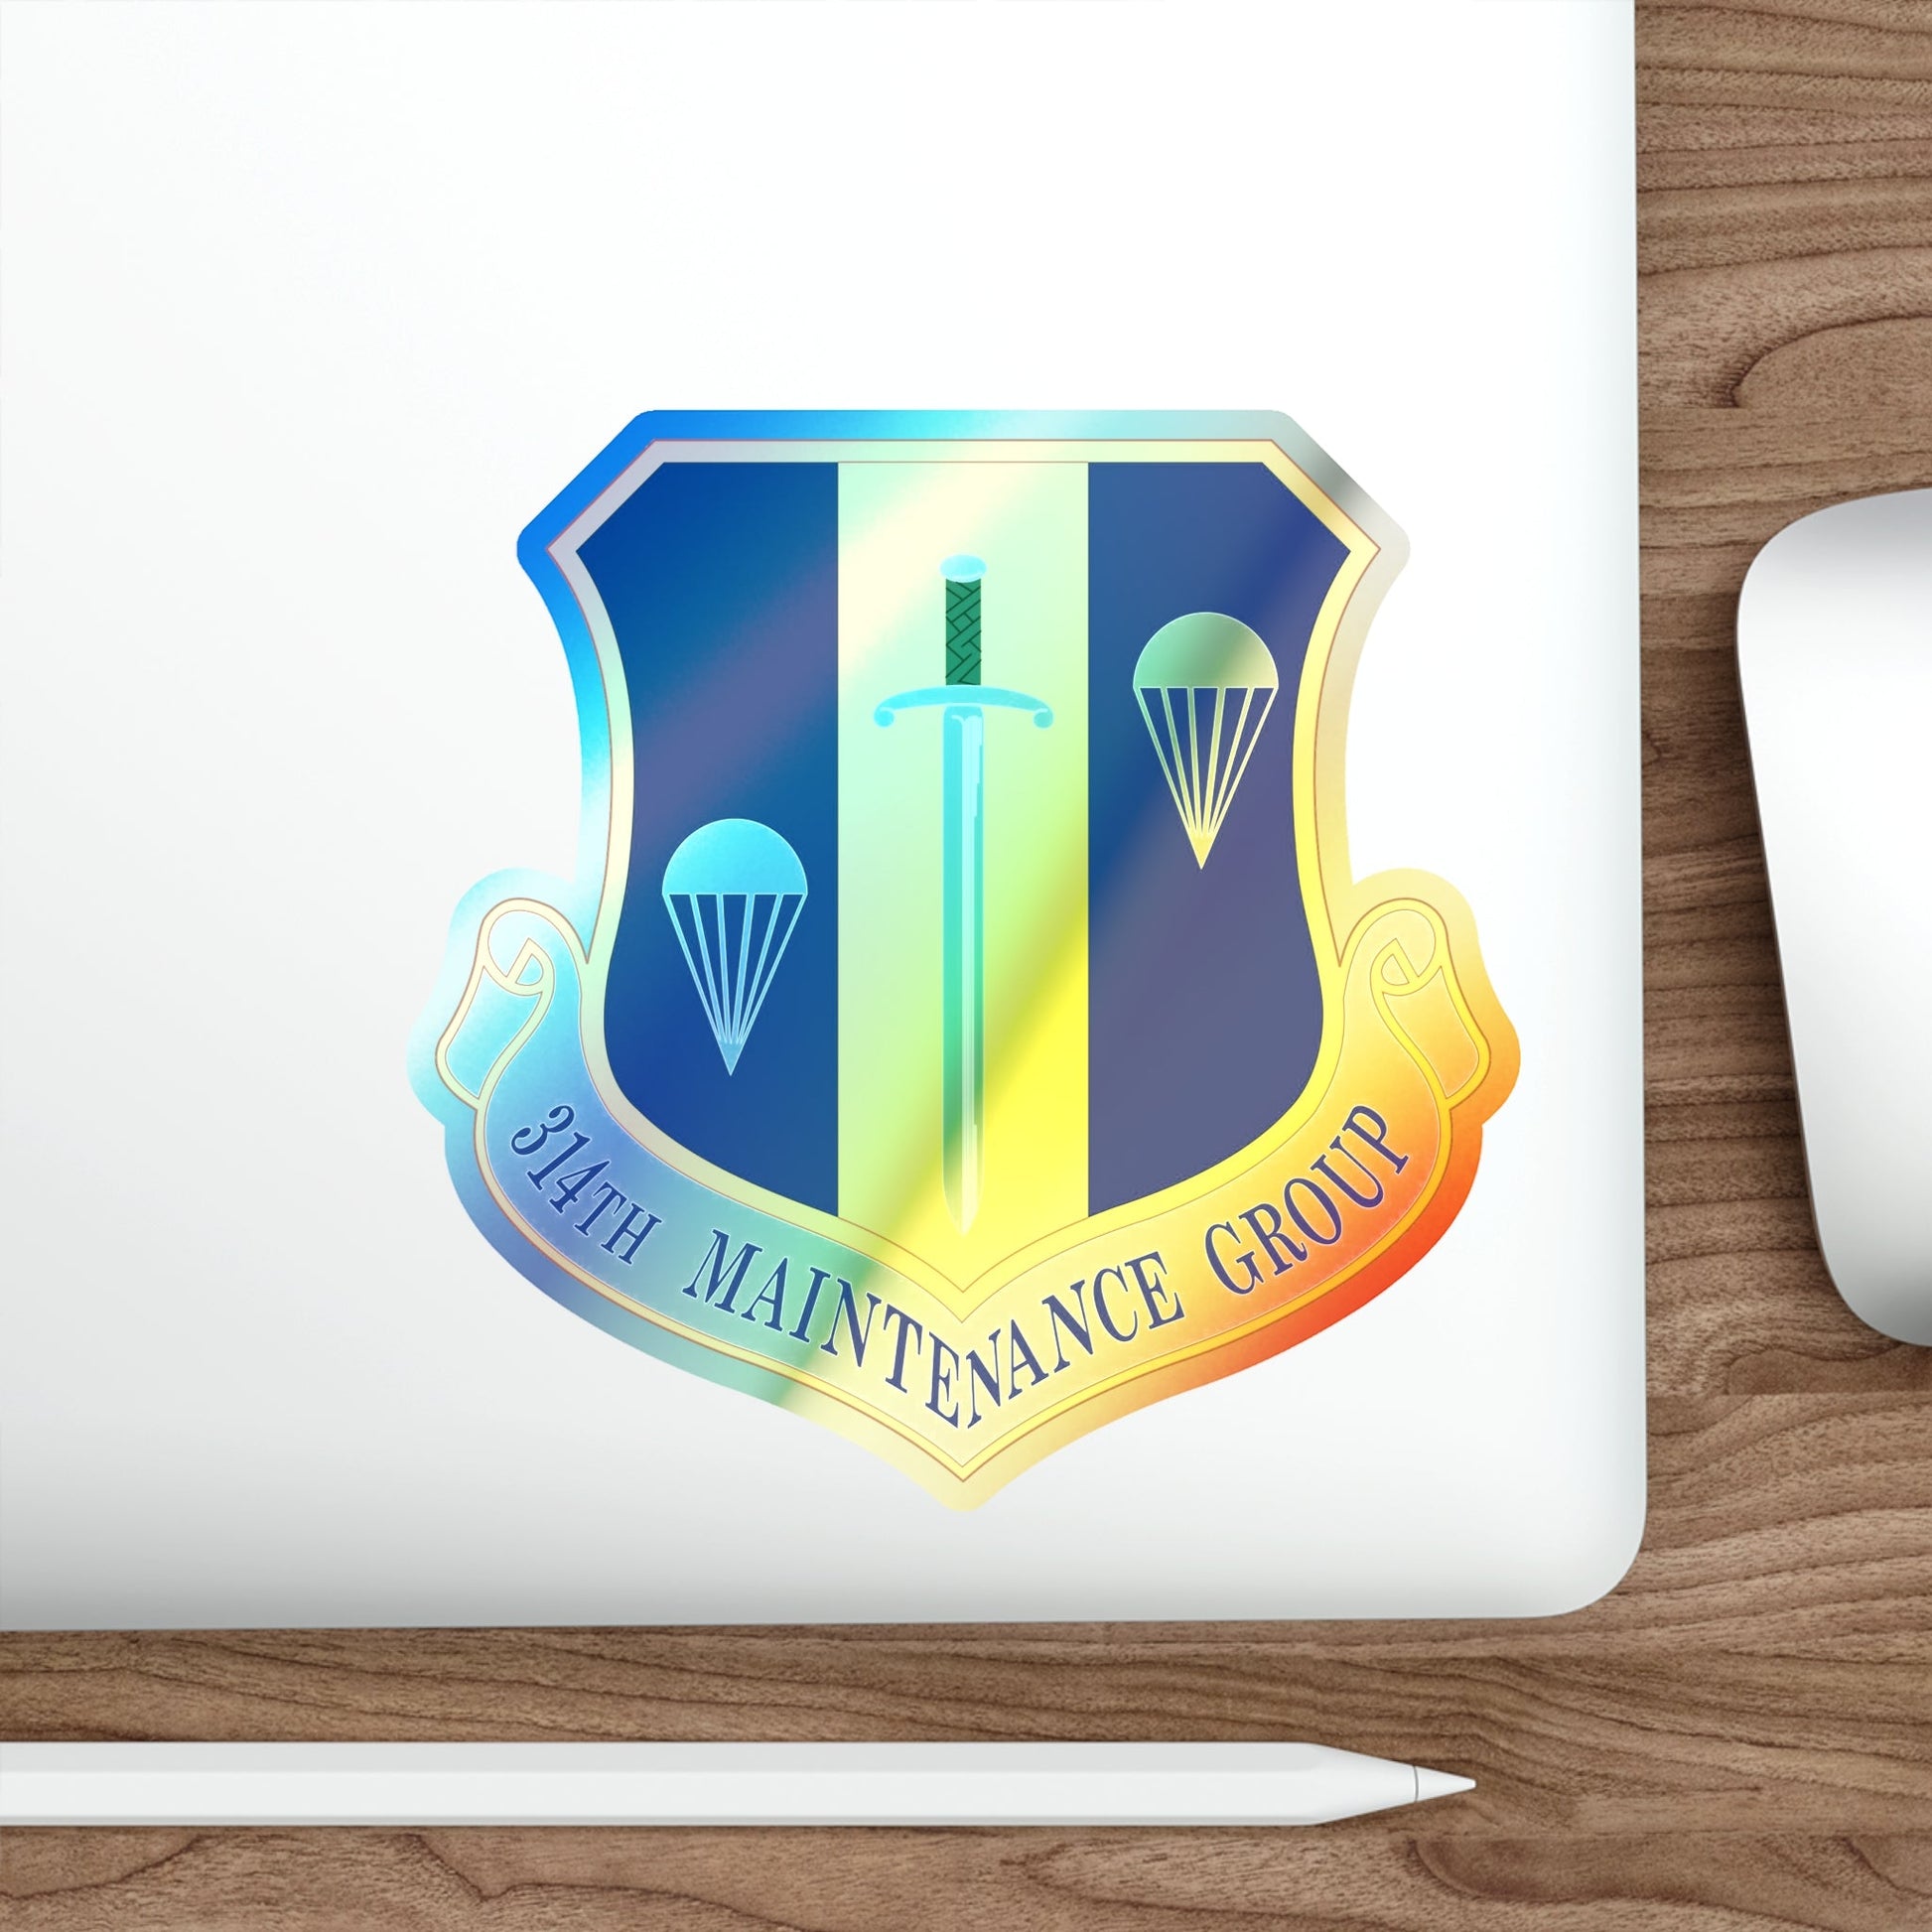 314 Maintenance Group AETC (U.S. Air Force) Holographic STICKER Die-Cut Vinyl Decal-The Sticker Space